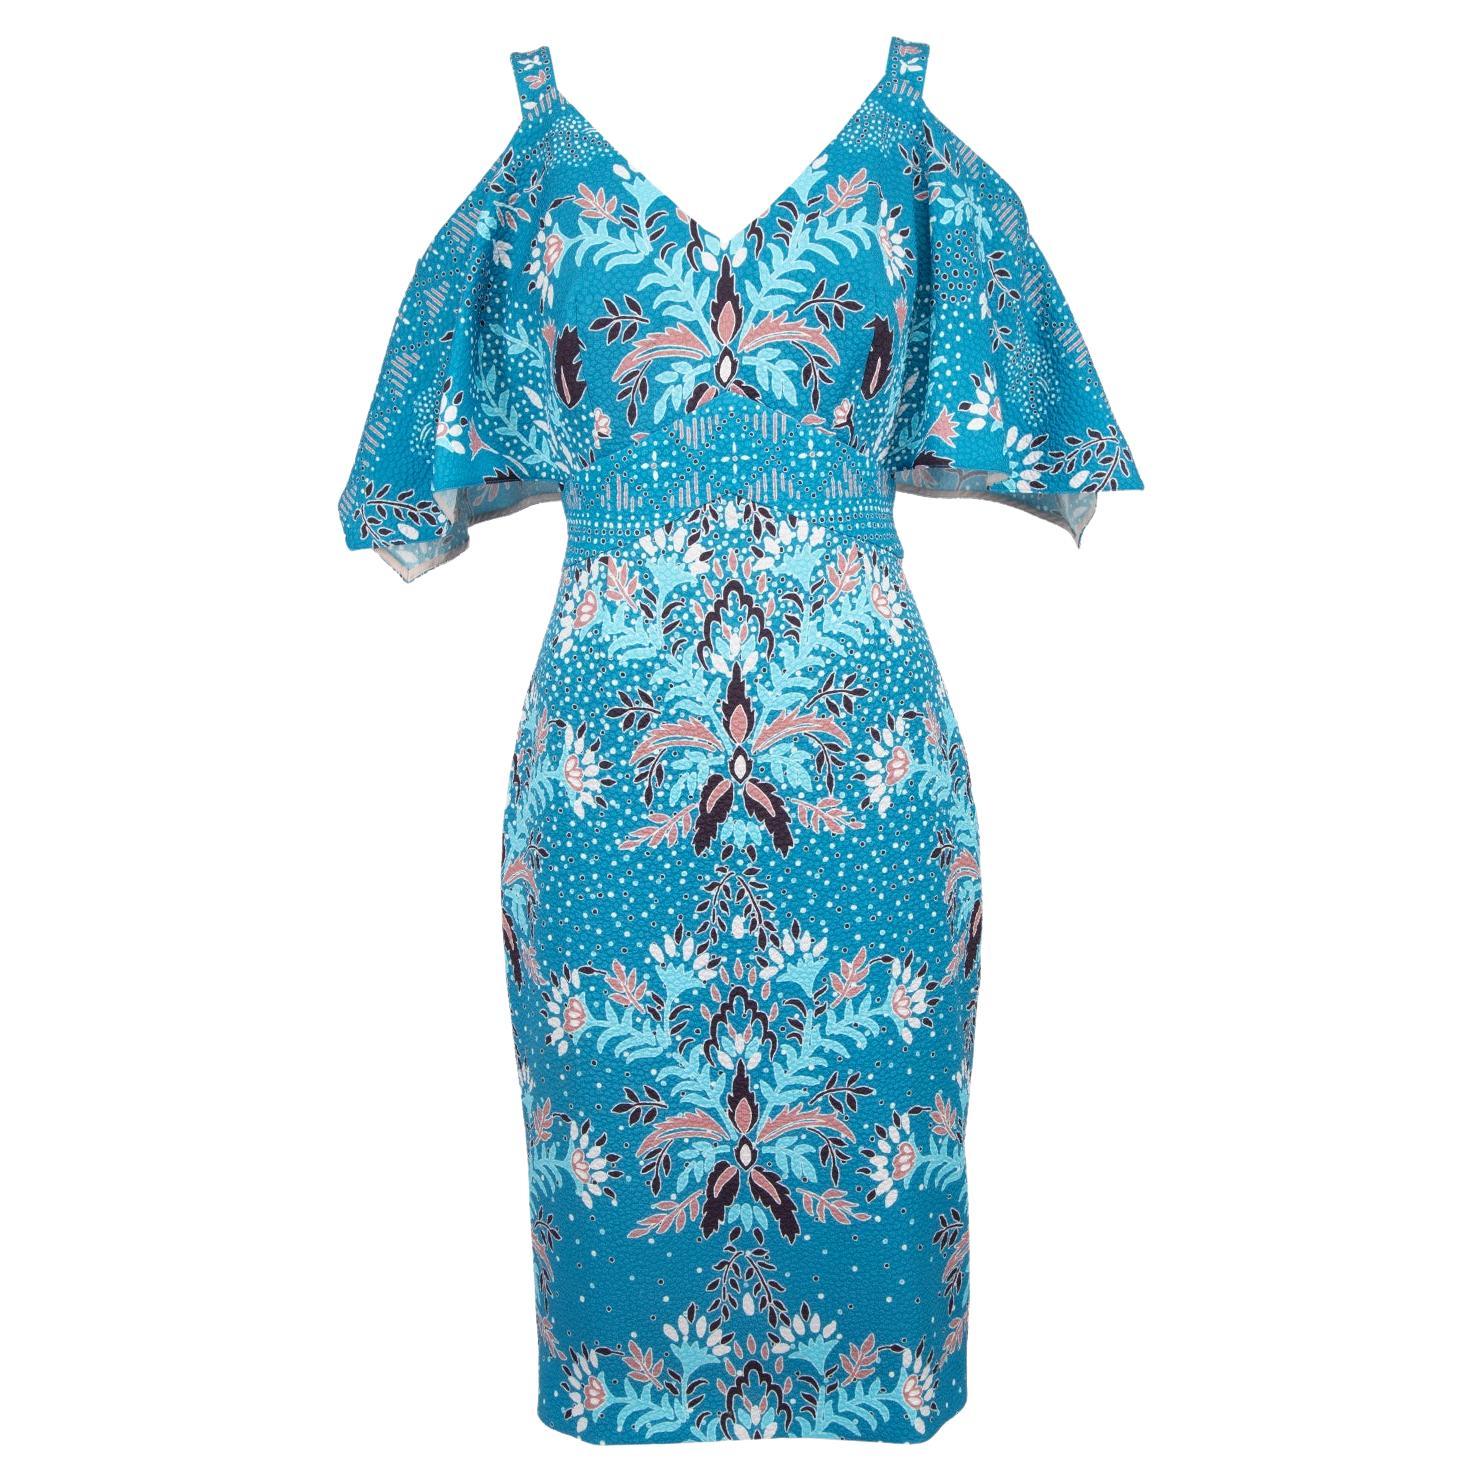 Pre-Loved Peter Pilotto Women's Patterned Midi Dress For Sale